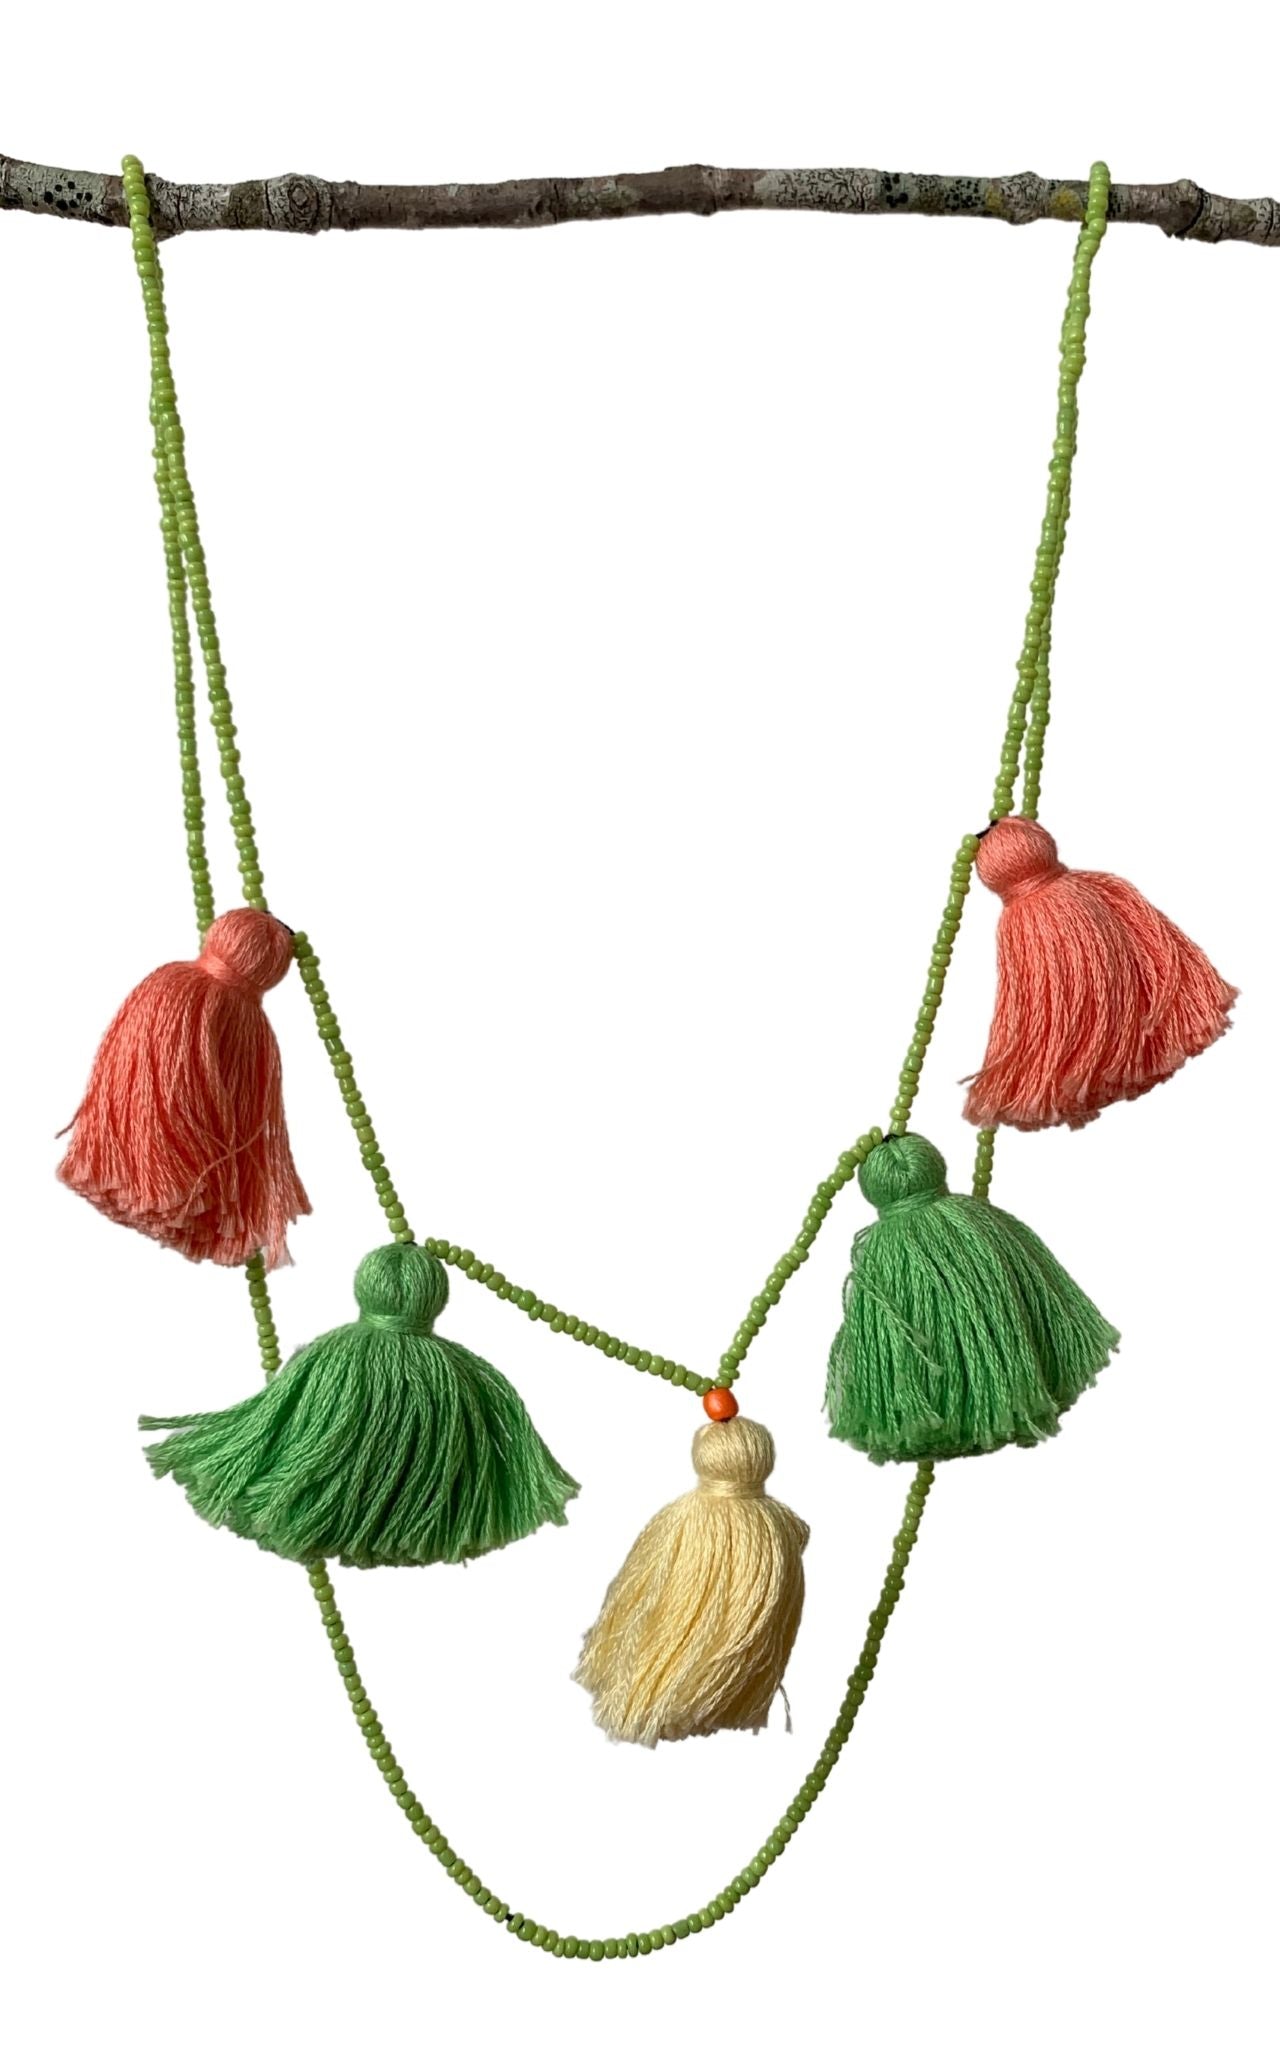 Surya Australia Ethical Cotton Tassel Necklaces from Nepal - Mudra